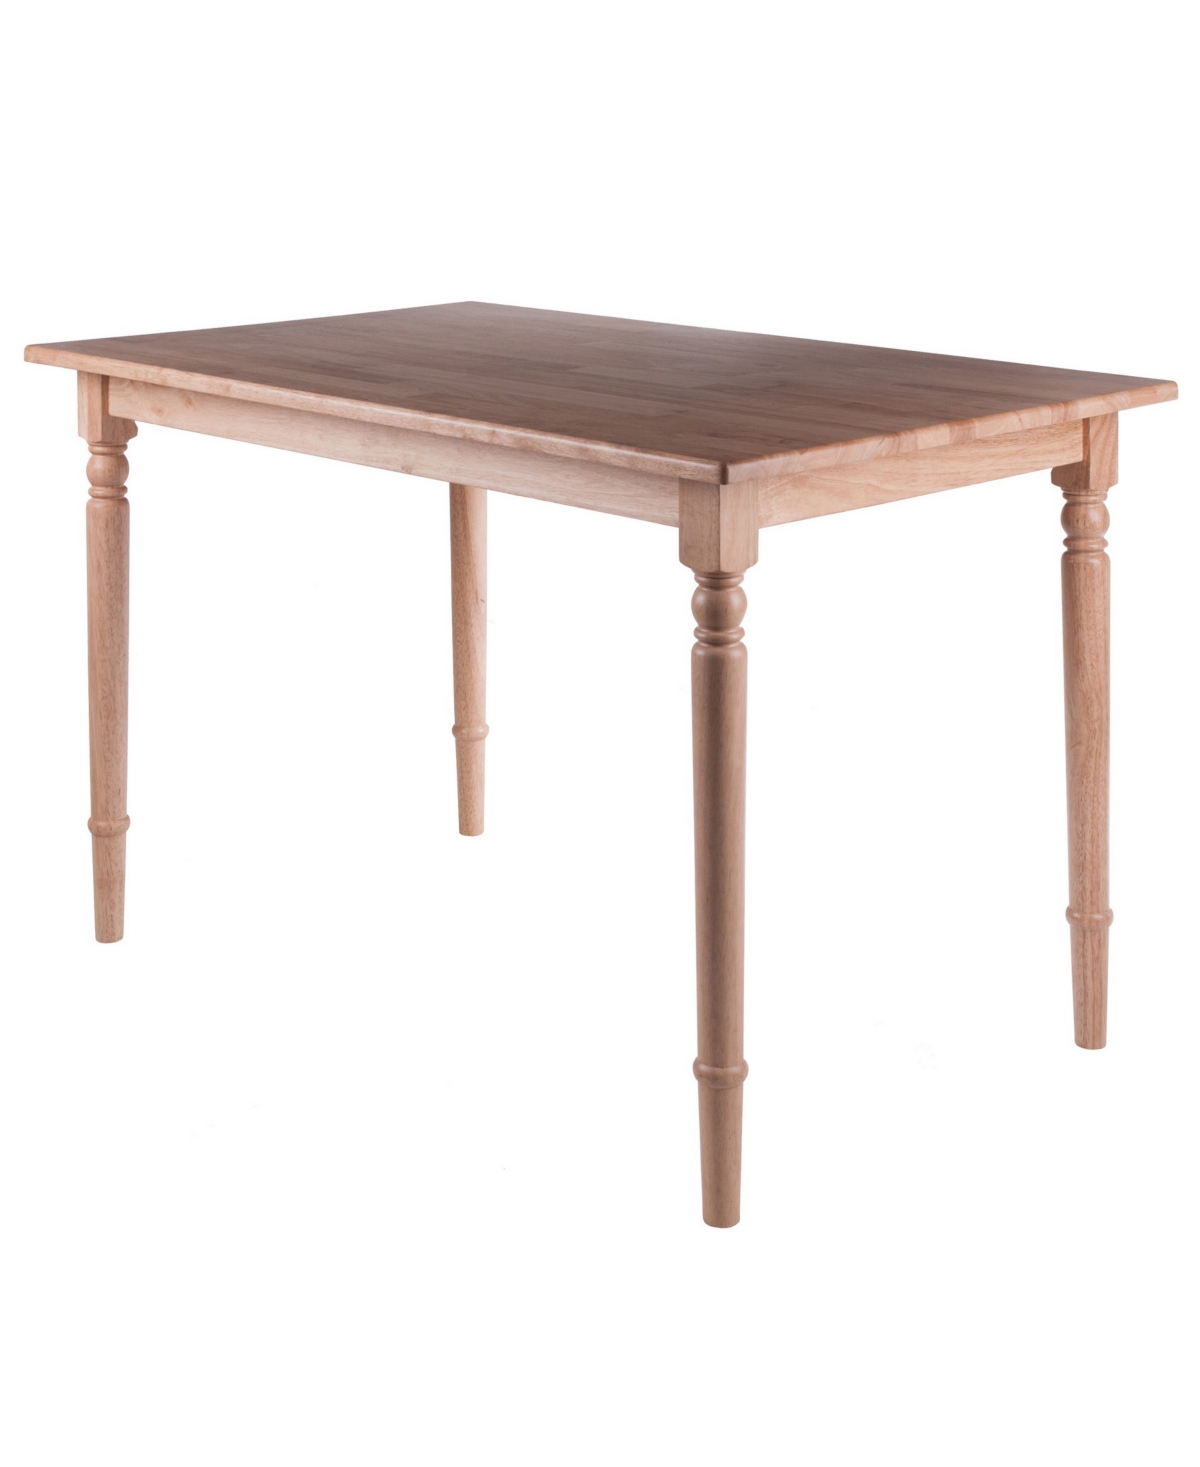 Winsome Ravenna 30.08" Wood Rectangle Dining Table In Natural